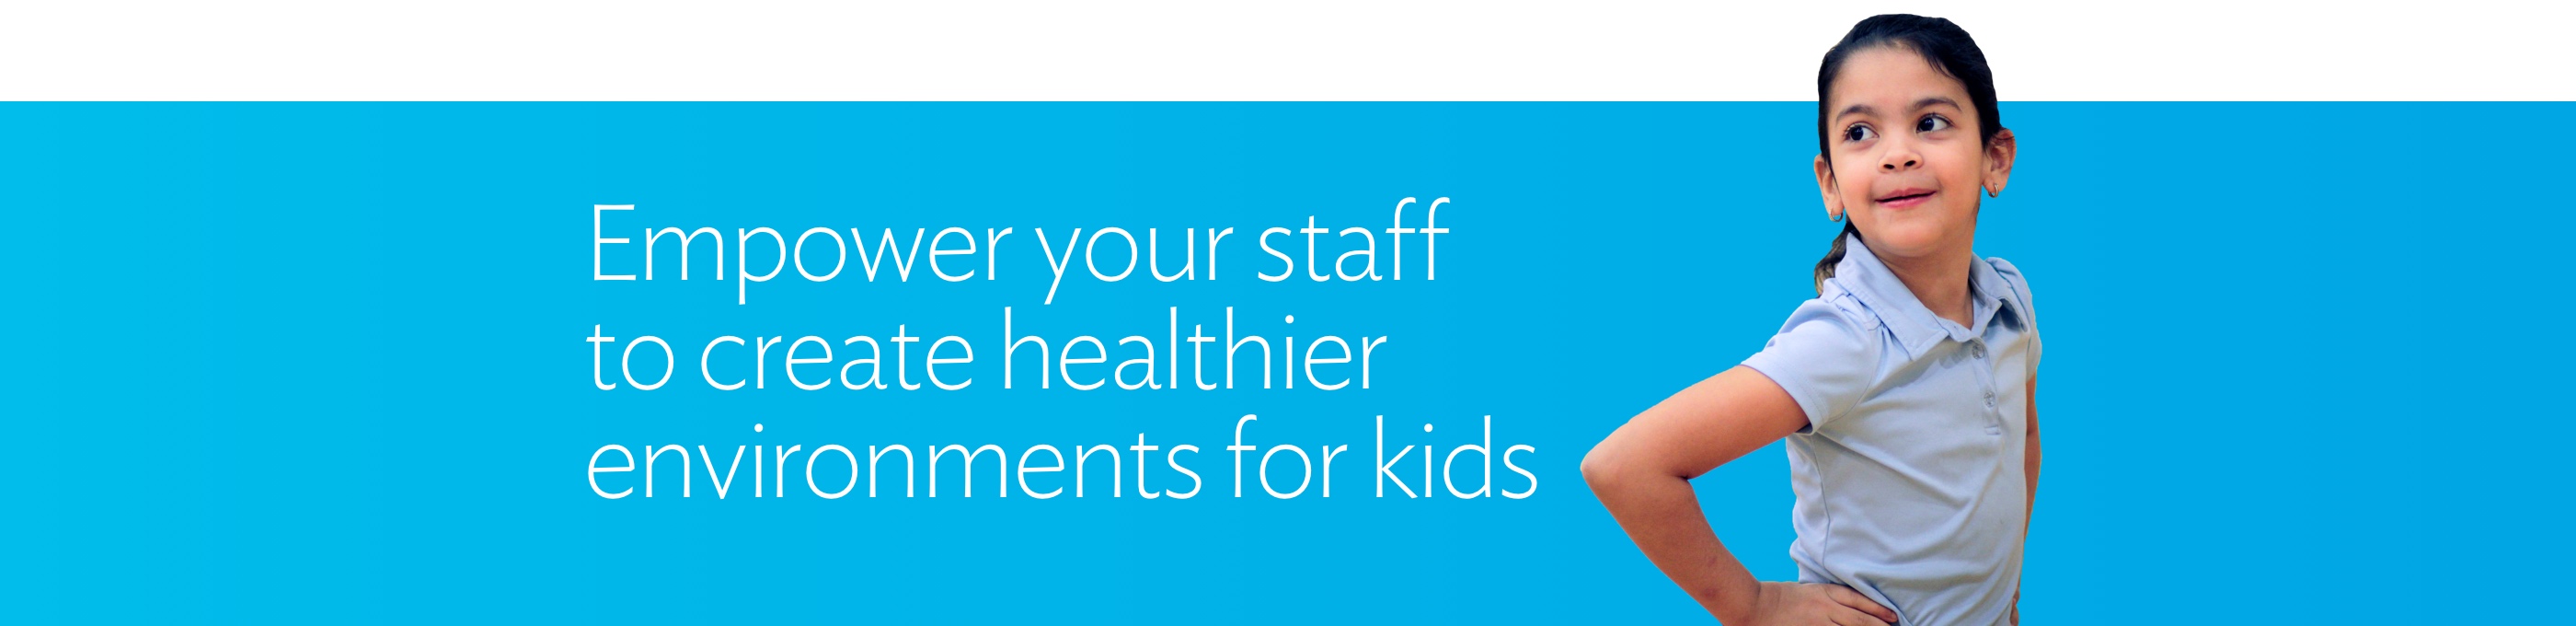 Empower your staff to create healthier environments for kids